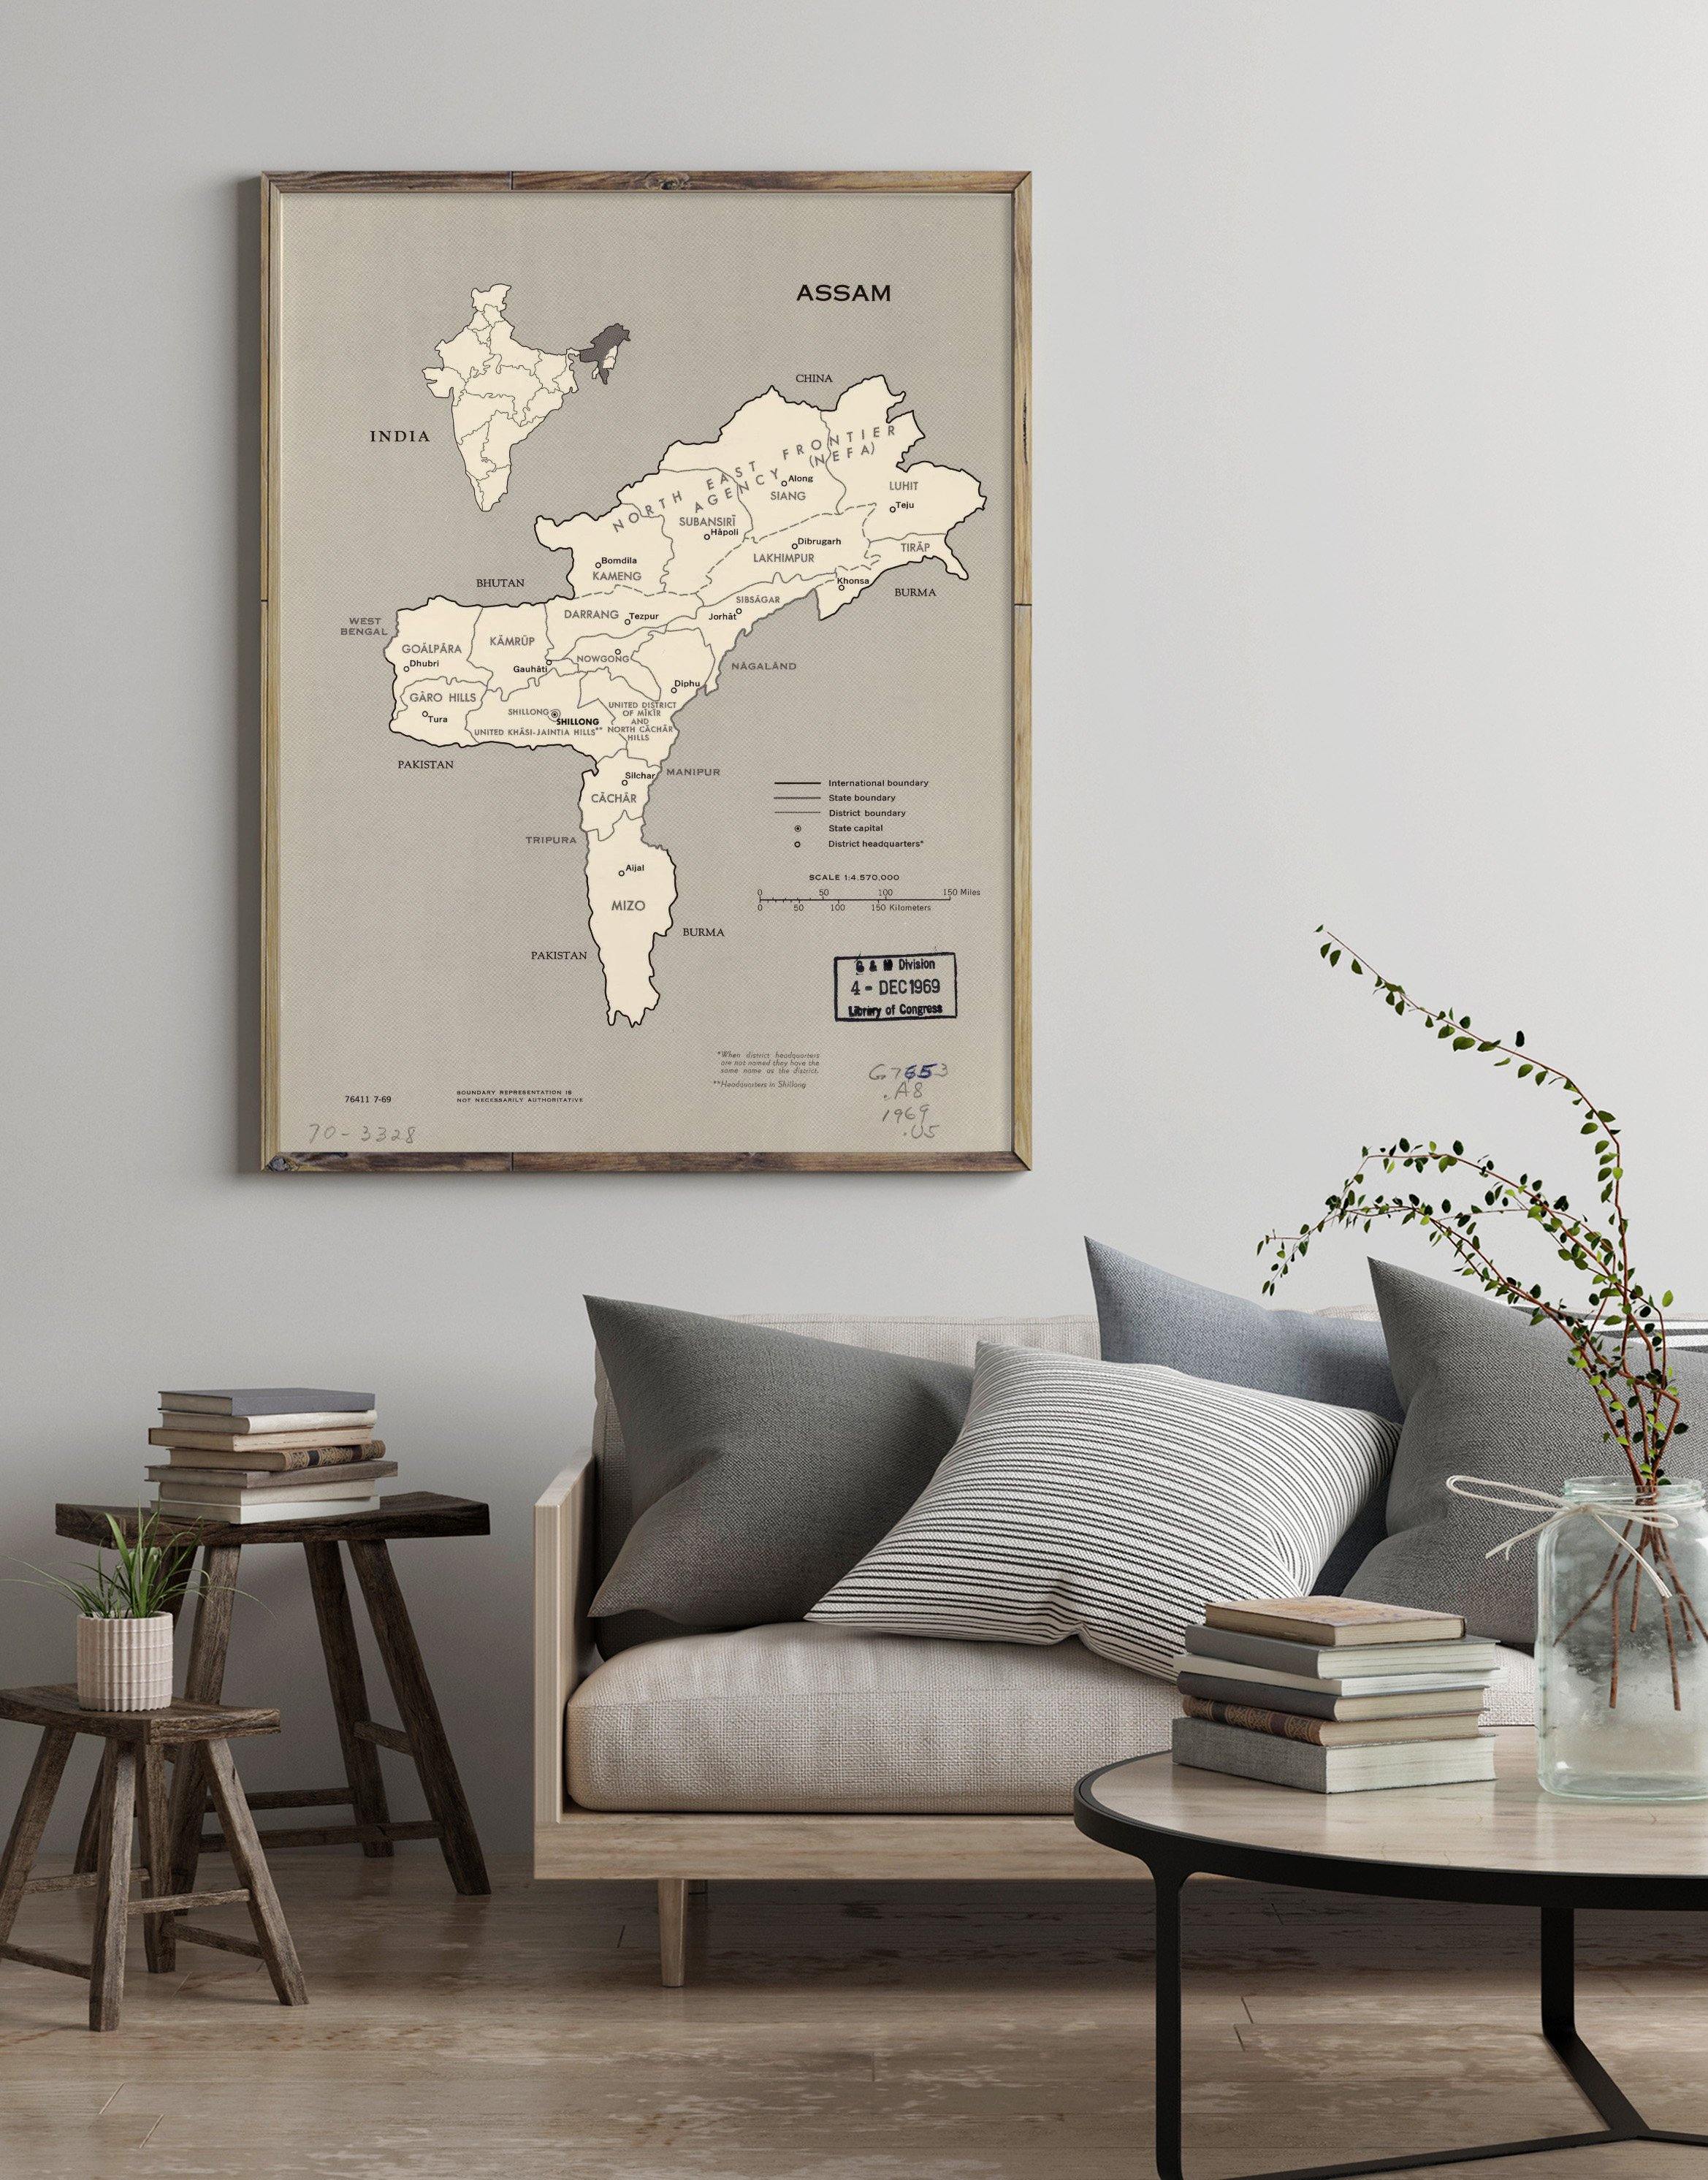 1969 Map| Assam. 7-69| Assam|Assam India|India Map Size: 18 inches x 2 - New York Map Company